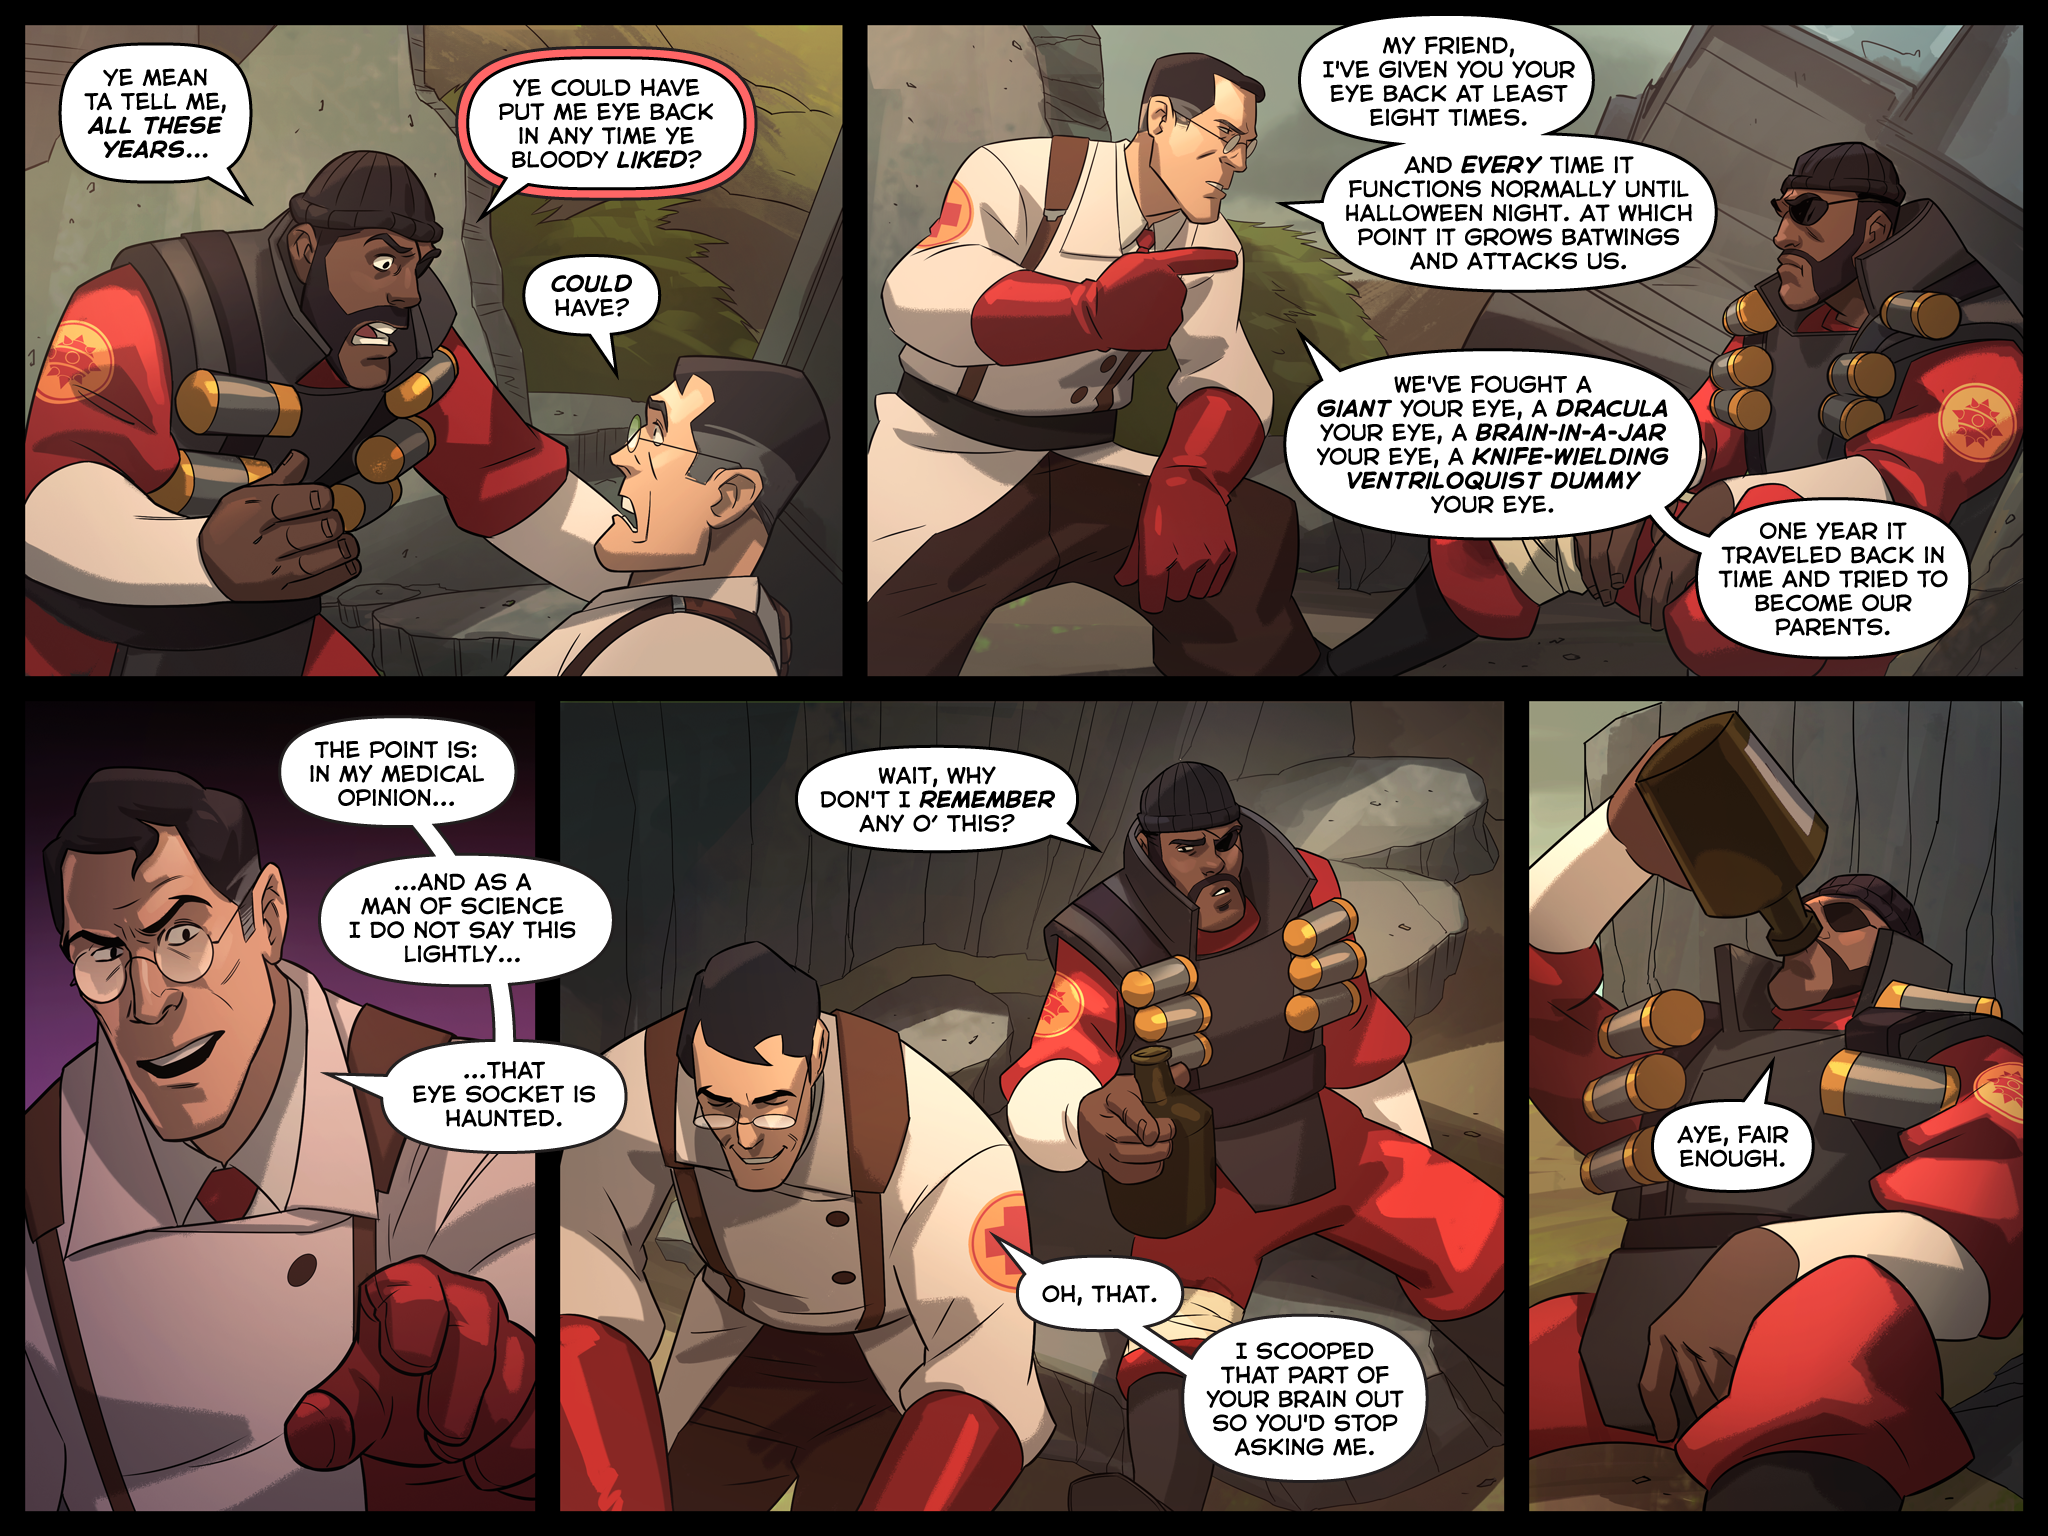 Remember that TF2 comic they said they were gonna publish at regular interv...